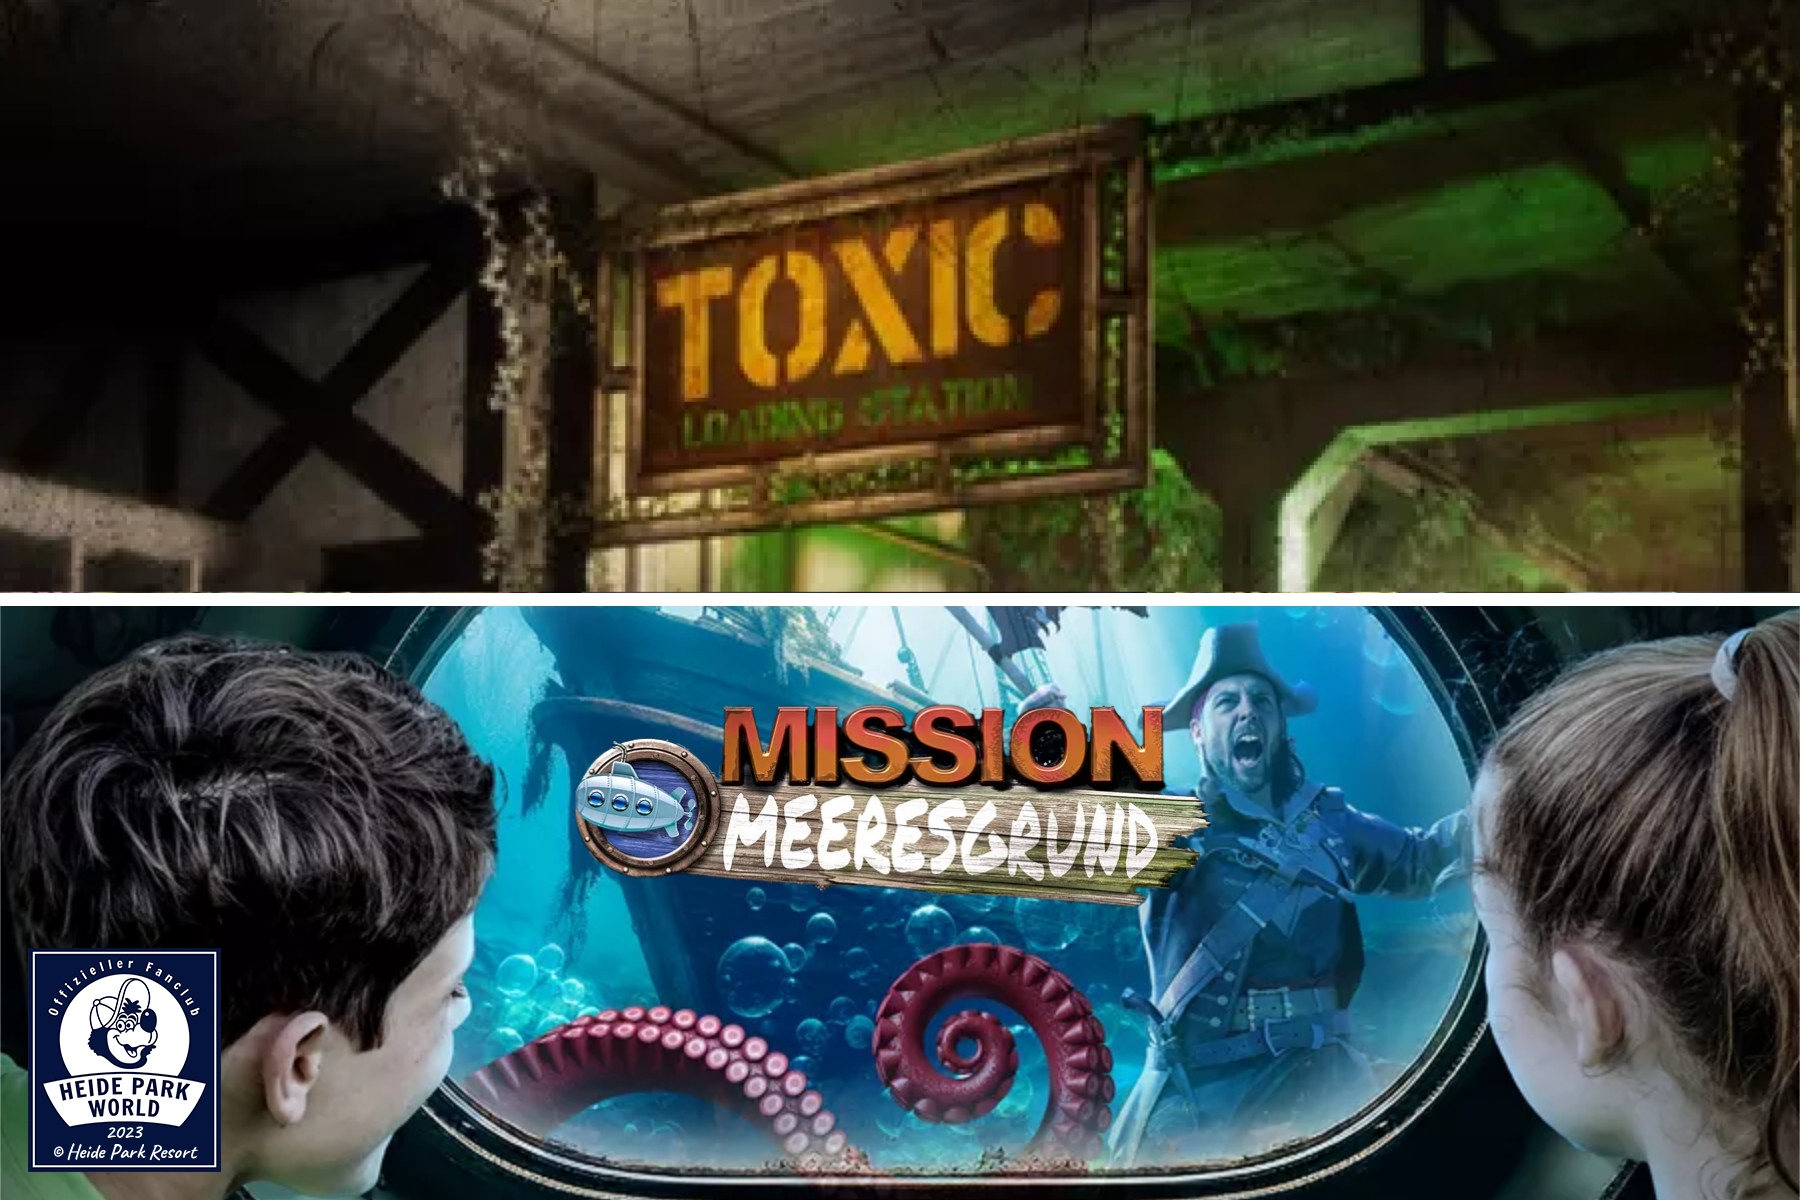 230518 hpr baublog toxic mission